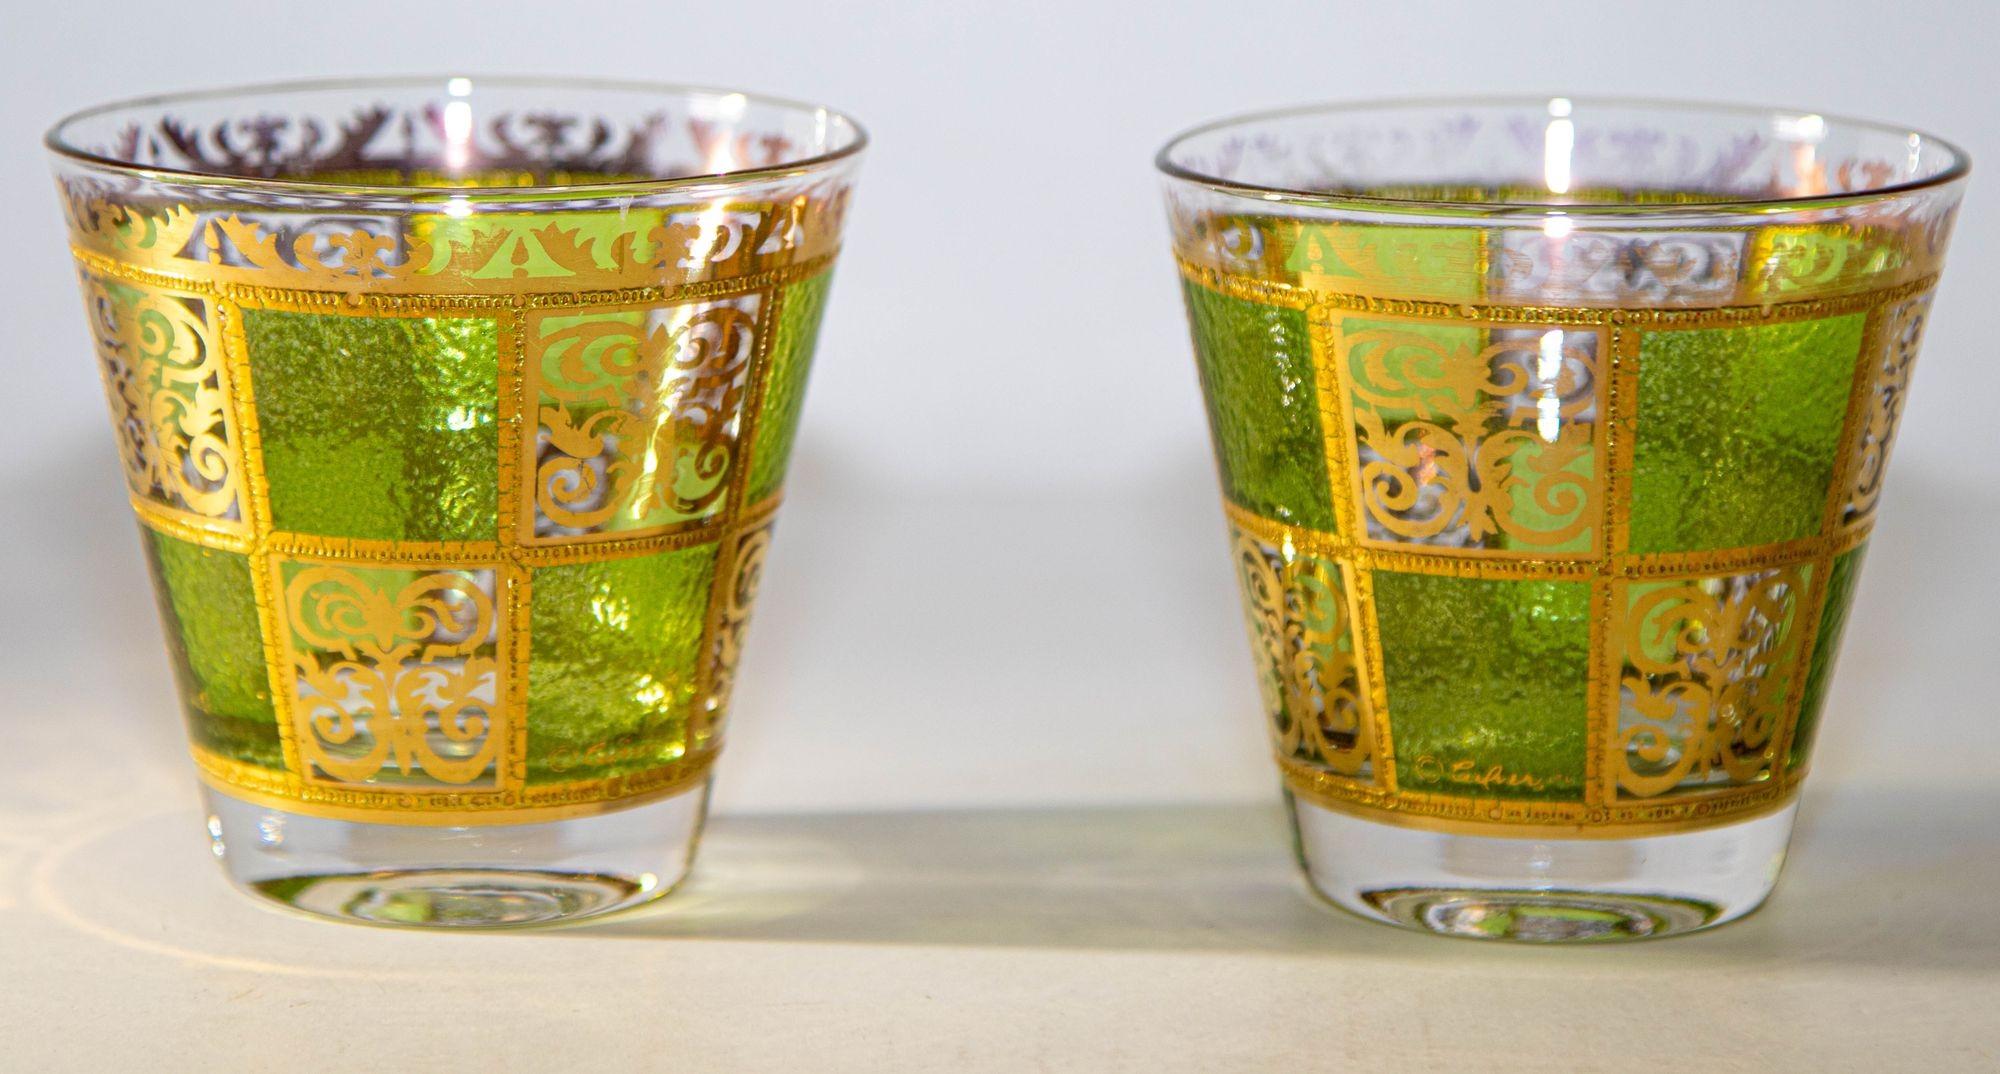 Vintage Culver Prado glasses in gold and green design.
Vintage Culver Prado rock green gold barware glasses set of 2.
Vintage 22kt gold gold leaf Prado pattern barware glasses.
1960s Culver Prado whiskey lowball glasses.
These rare glasses